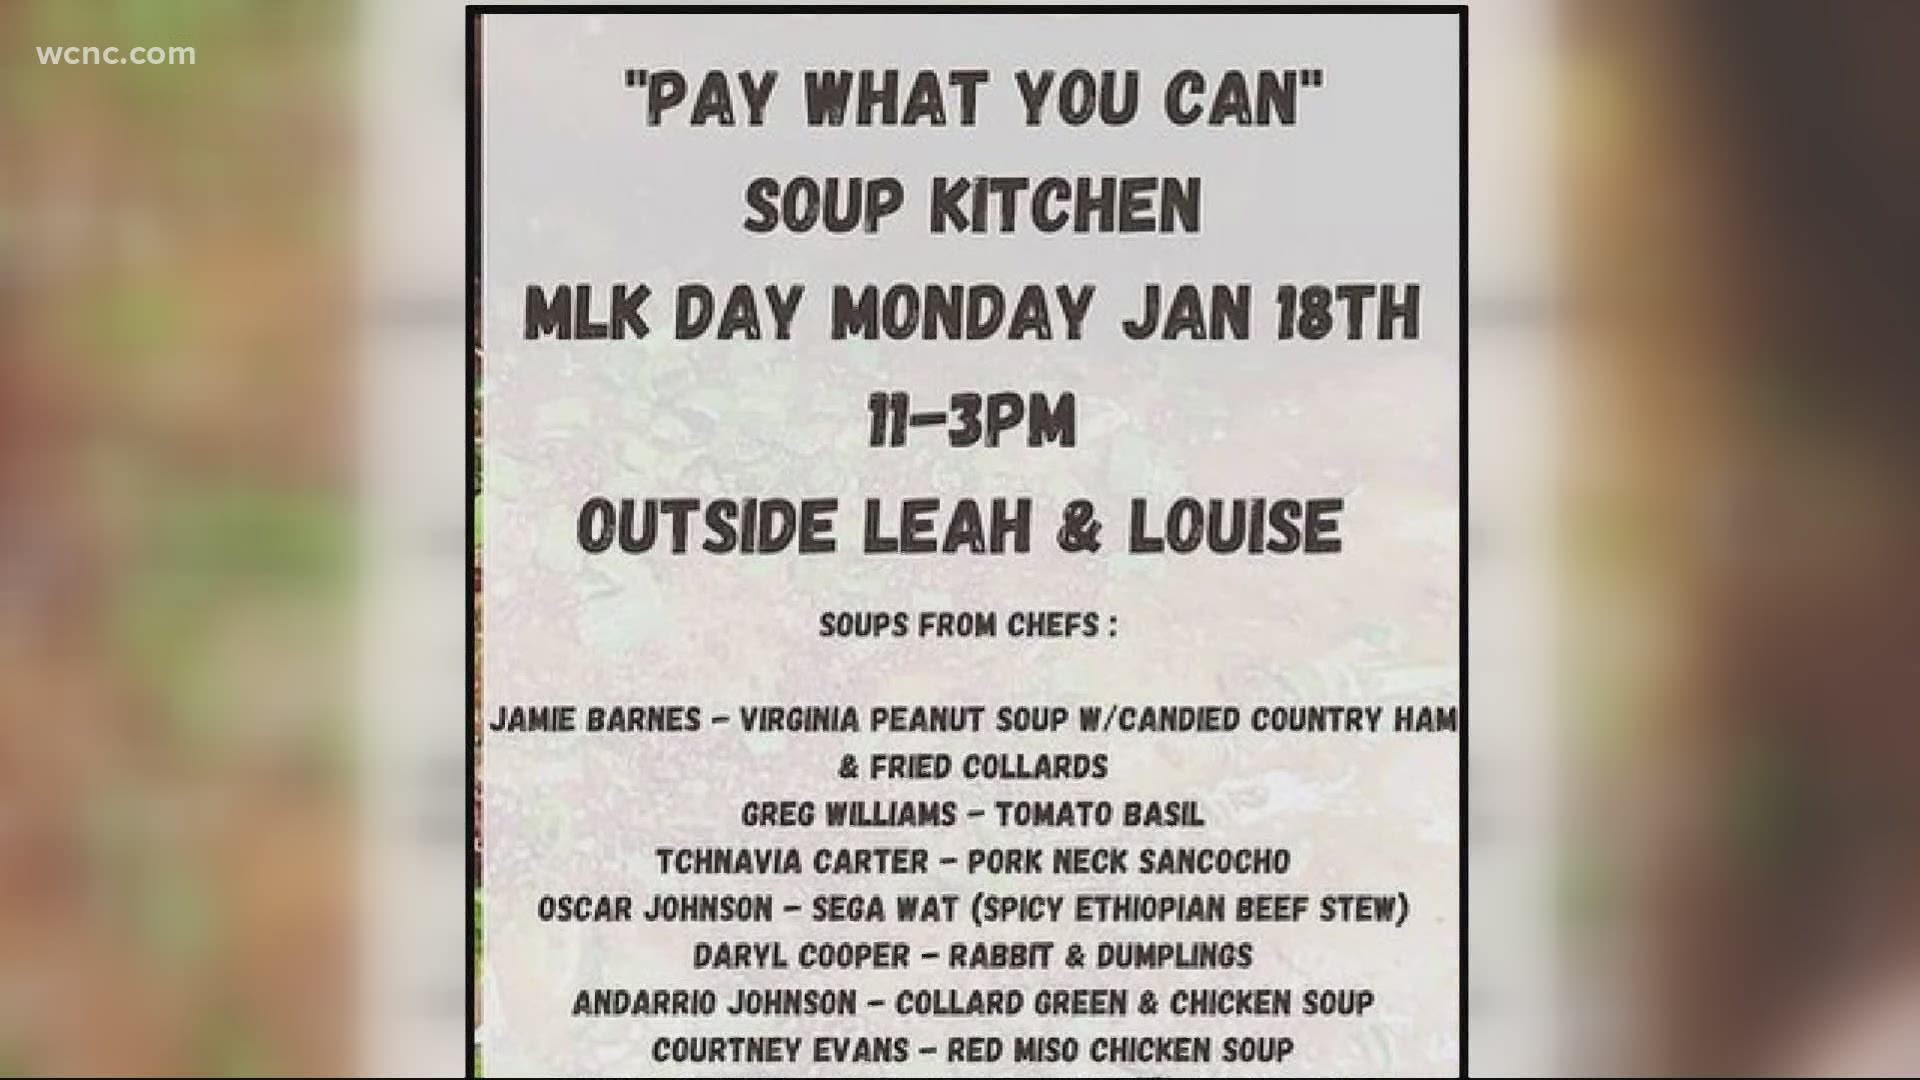 Dozens of Charlotte-area chefs are taking part in a MLK Day soup kitchen to help build trust between the community and local elected officials Monday.